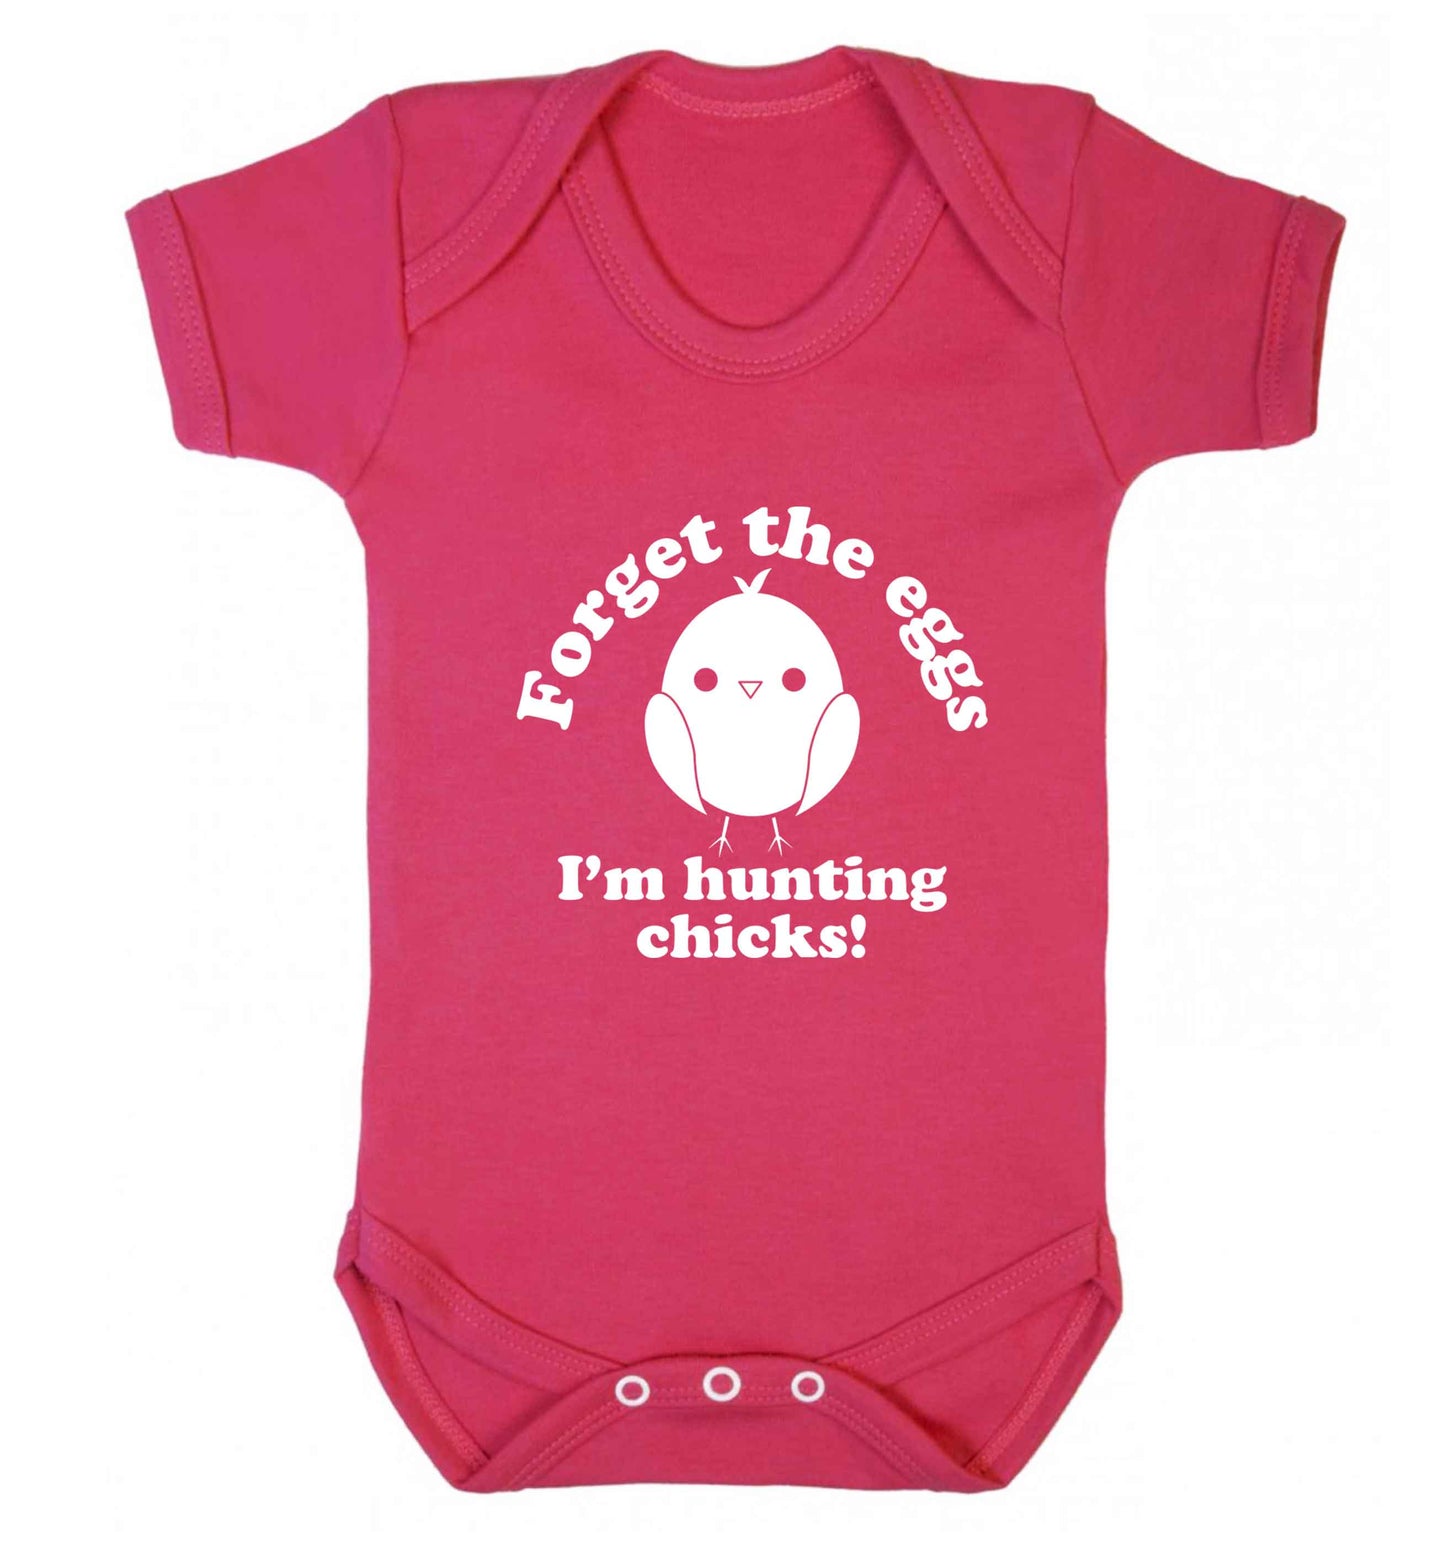 Forget the eggs I'm hunting chicks! baby vest dark pink 18-24 months